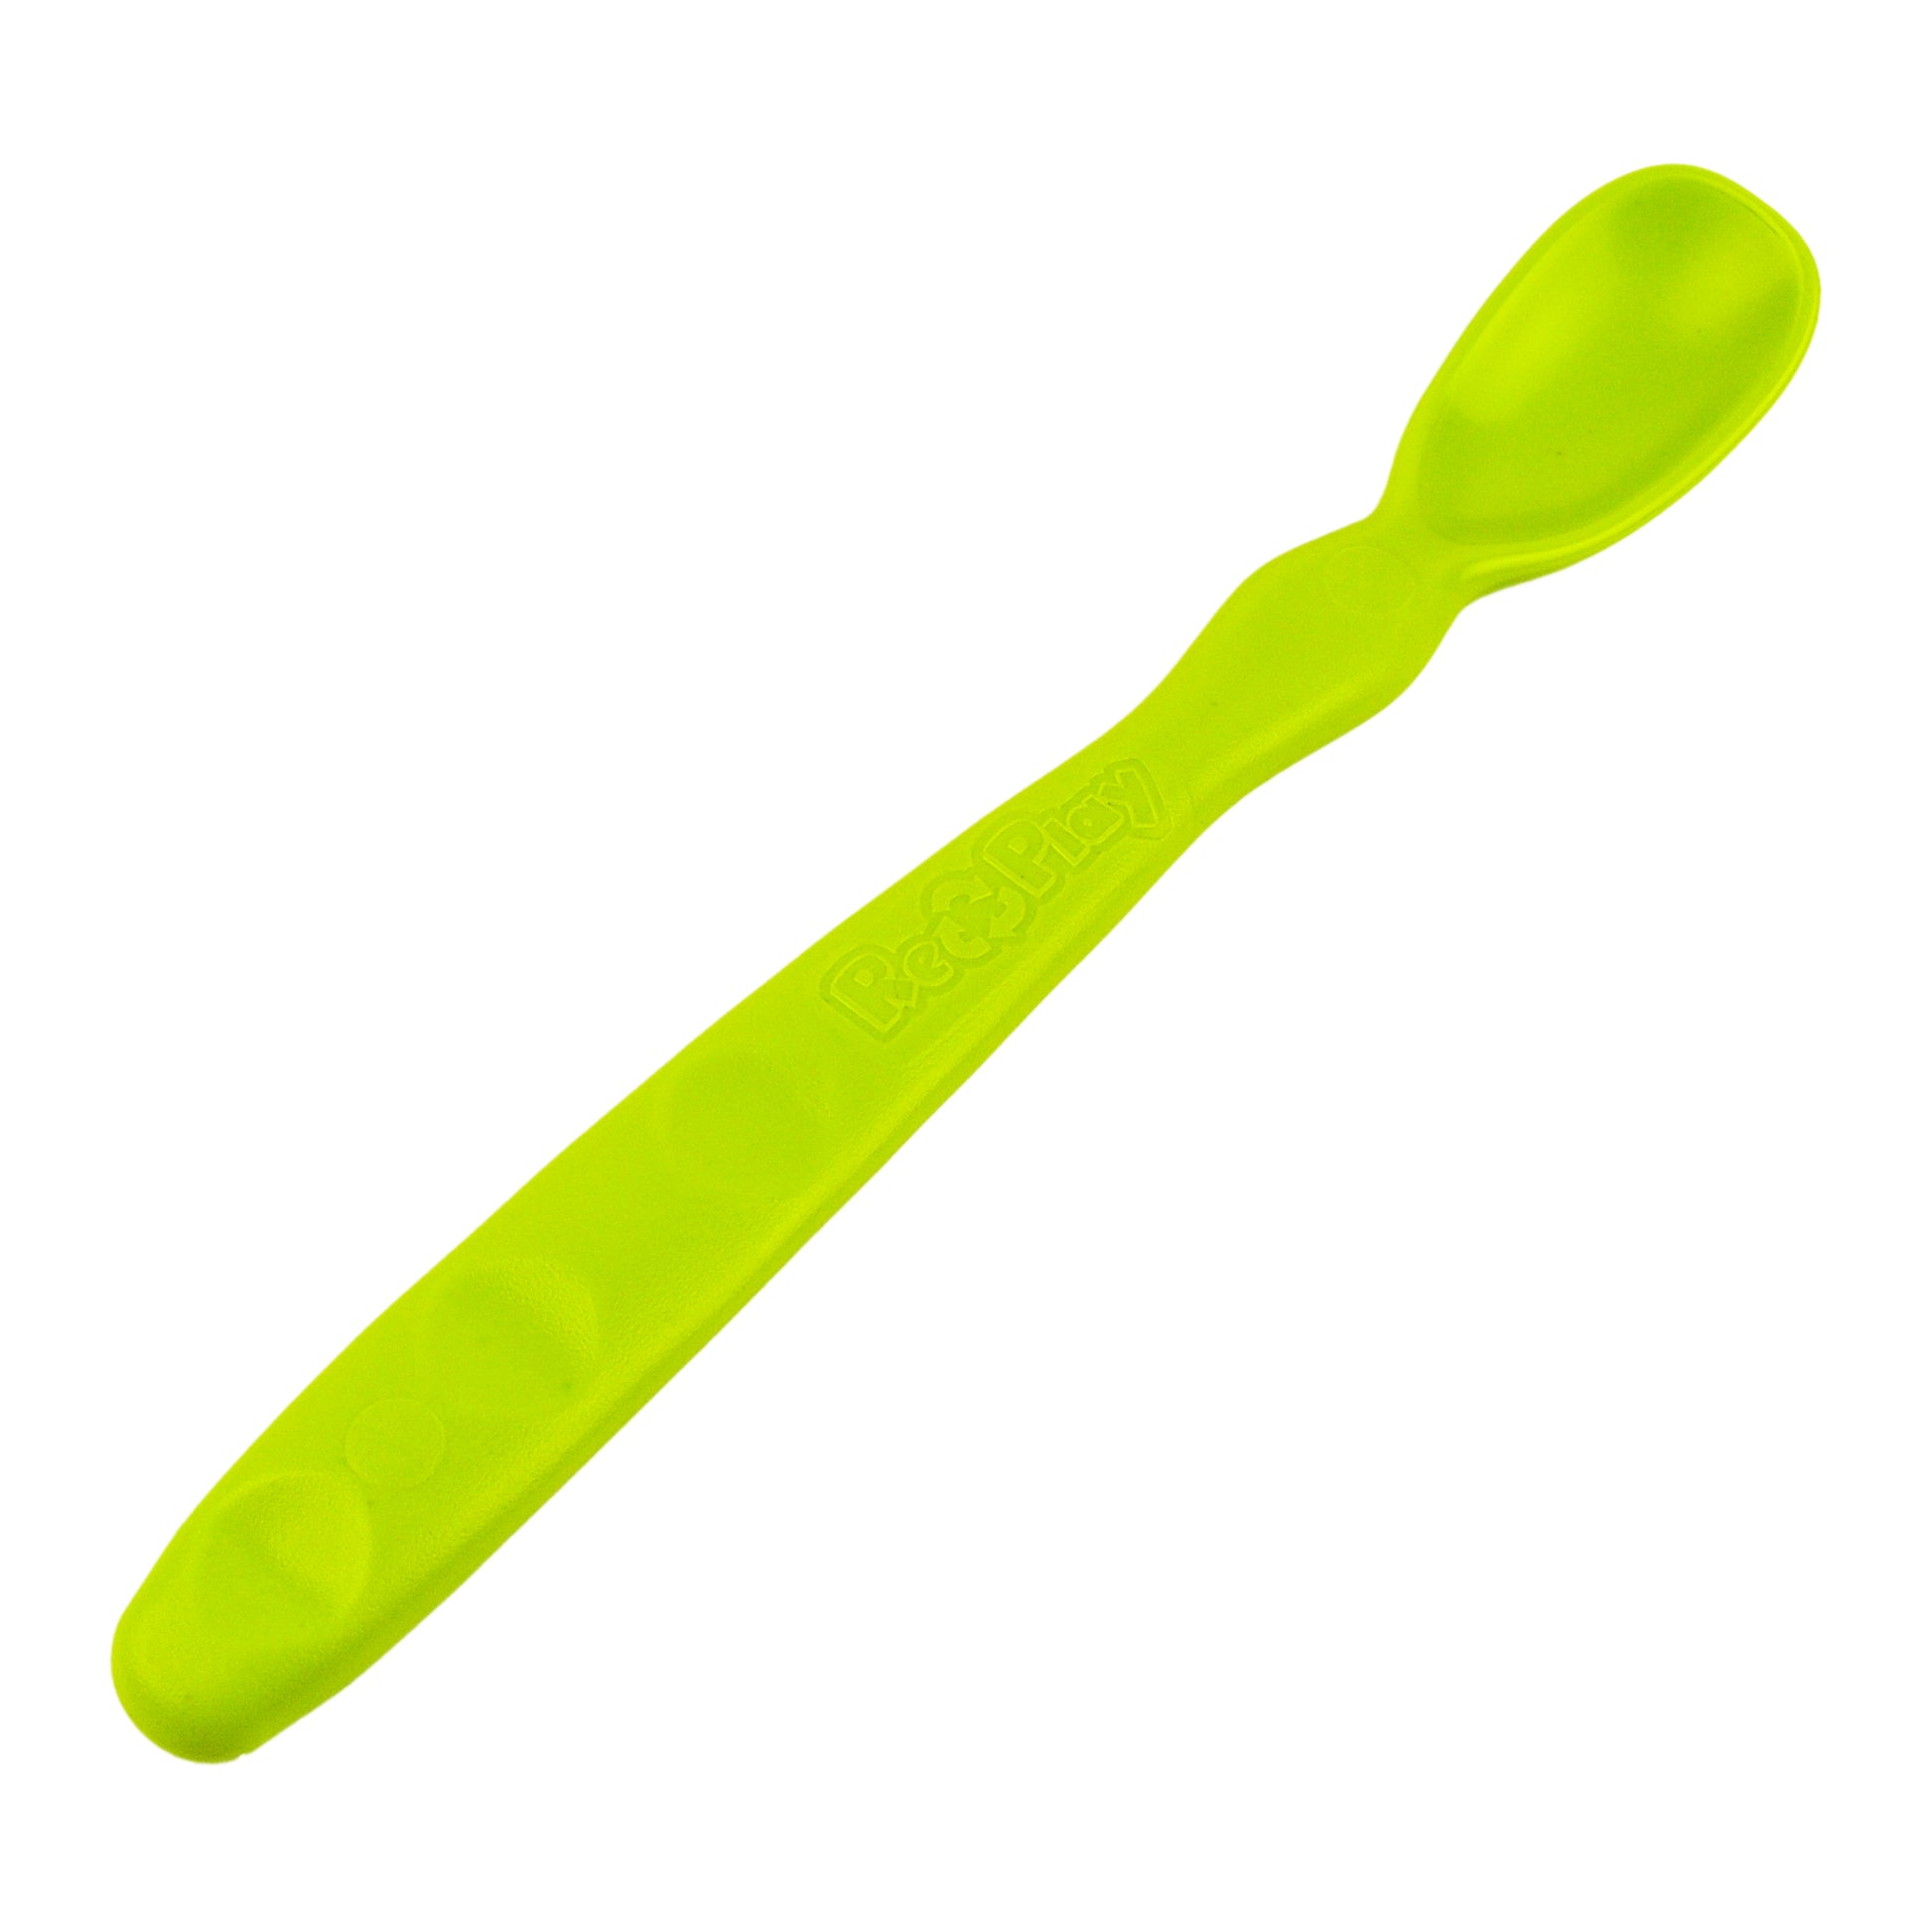 Replay Infant Spoon Green